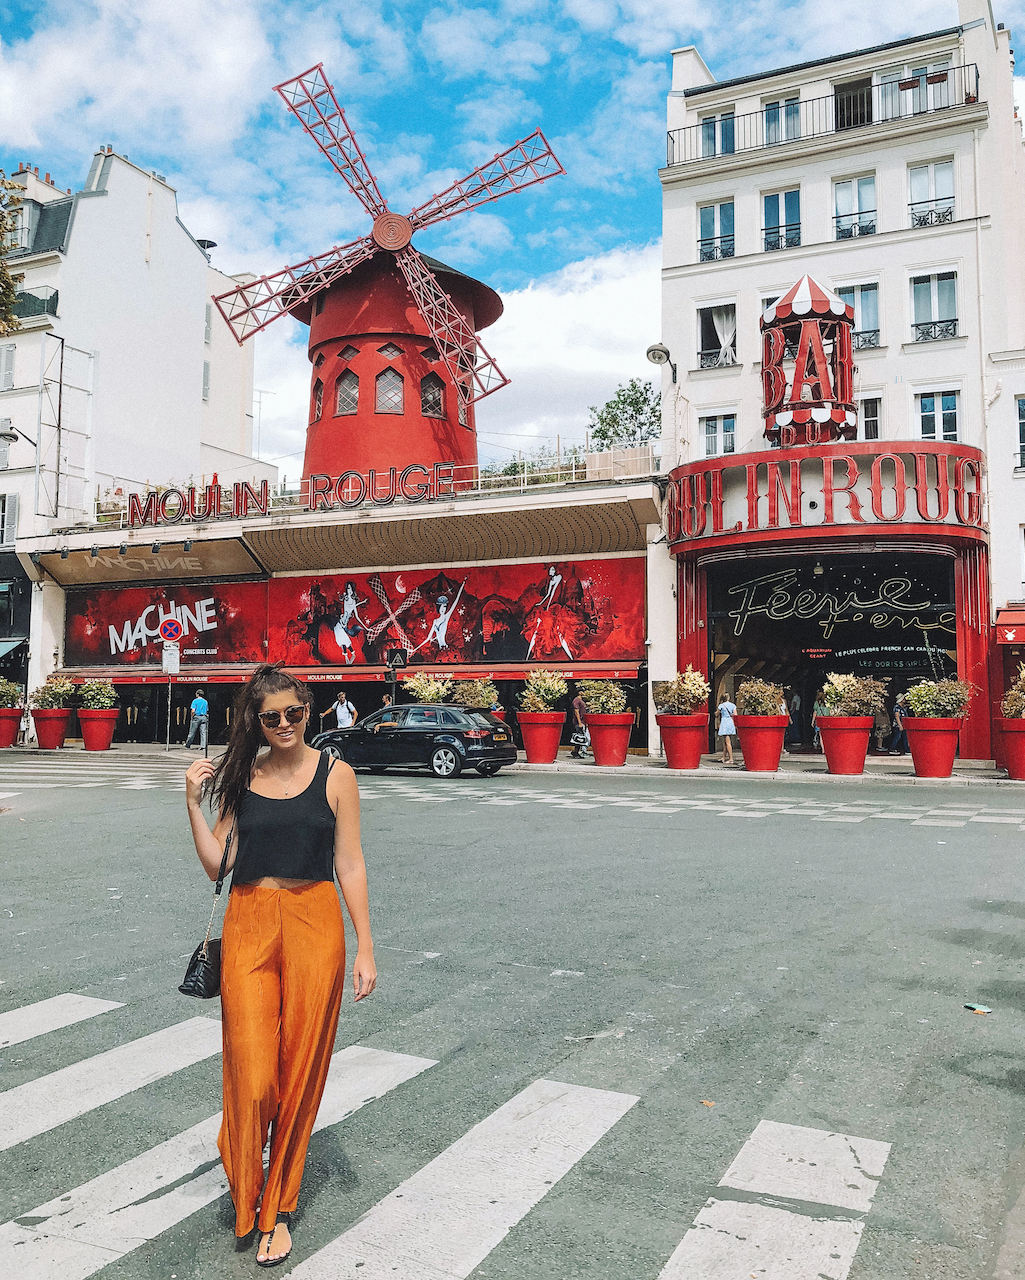 Woman posing in front of the Moulin Rouge during daytime - Paris - France